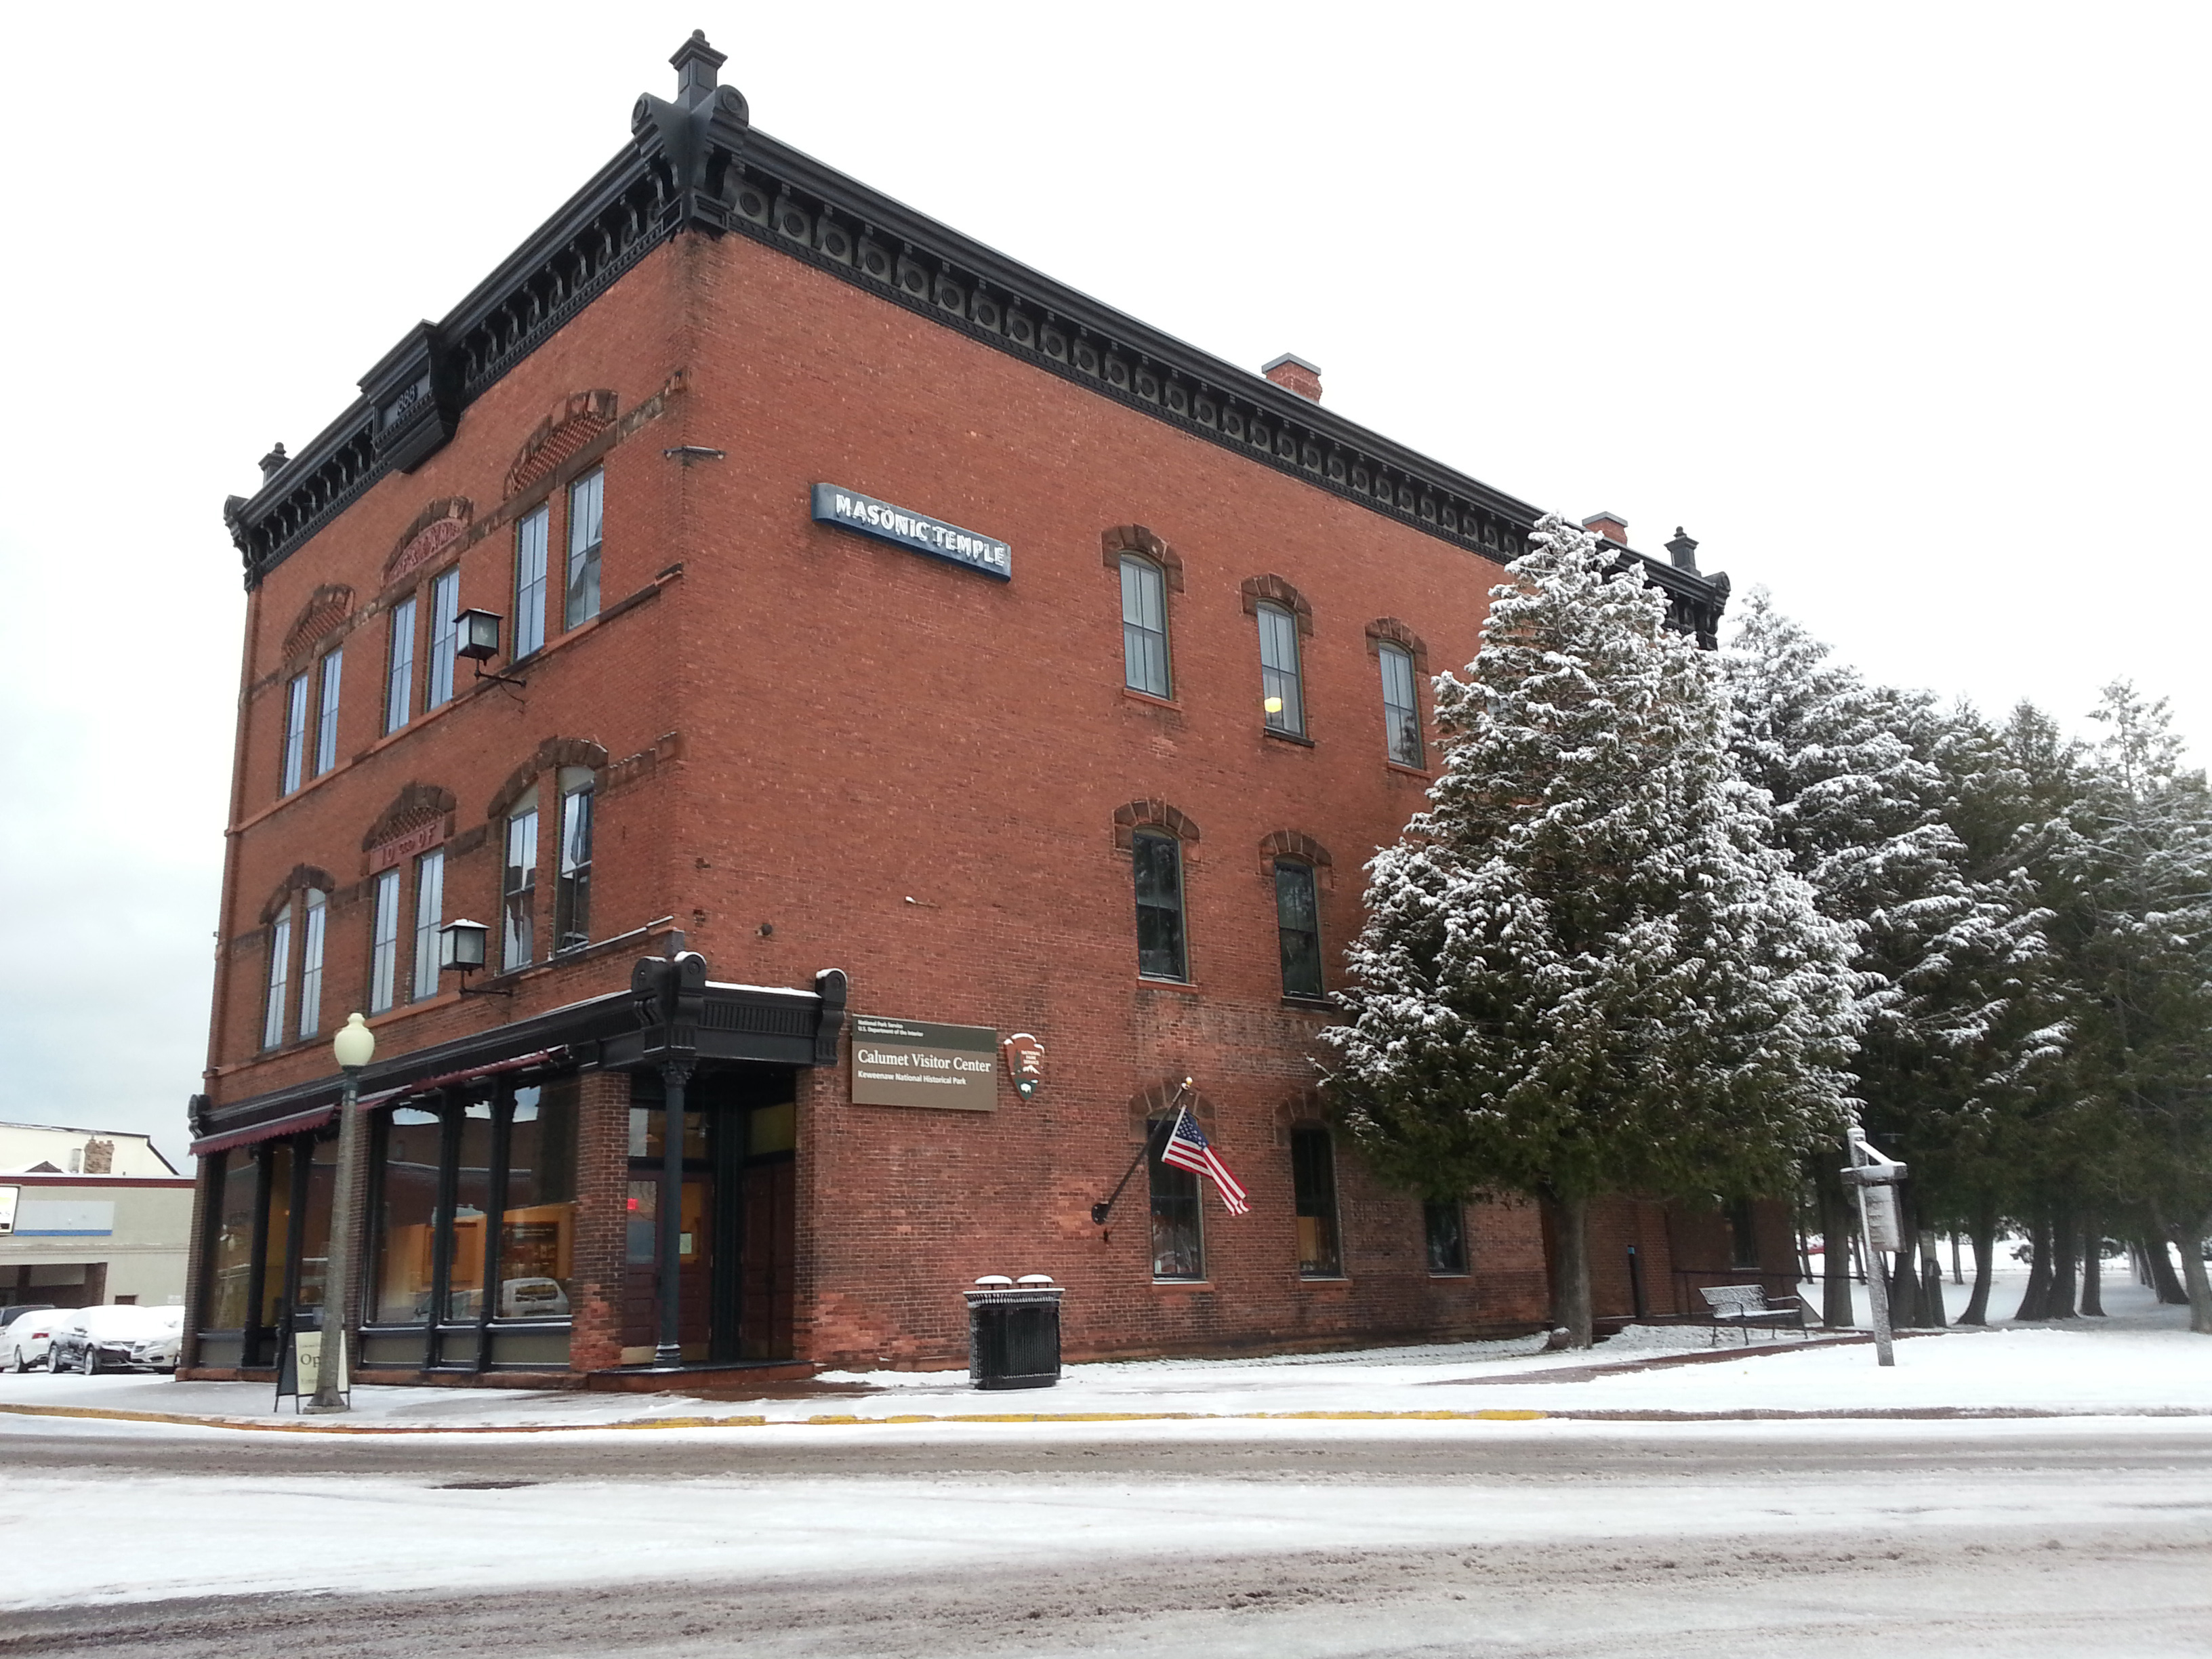 Three story brick building, with snow covered trees along the right side